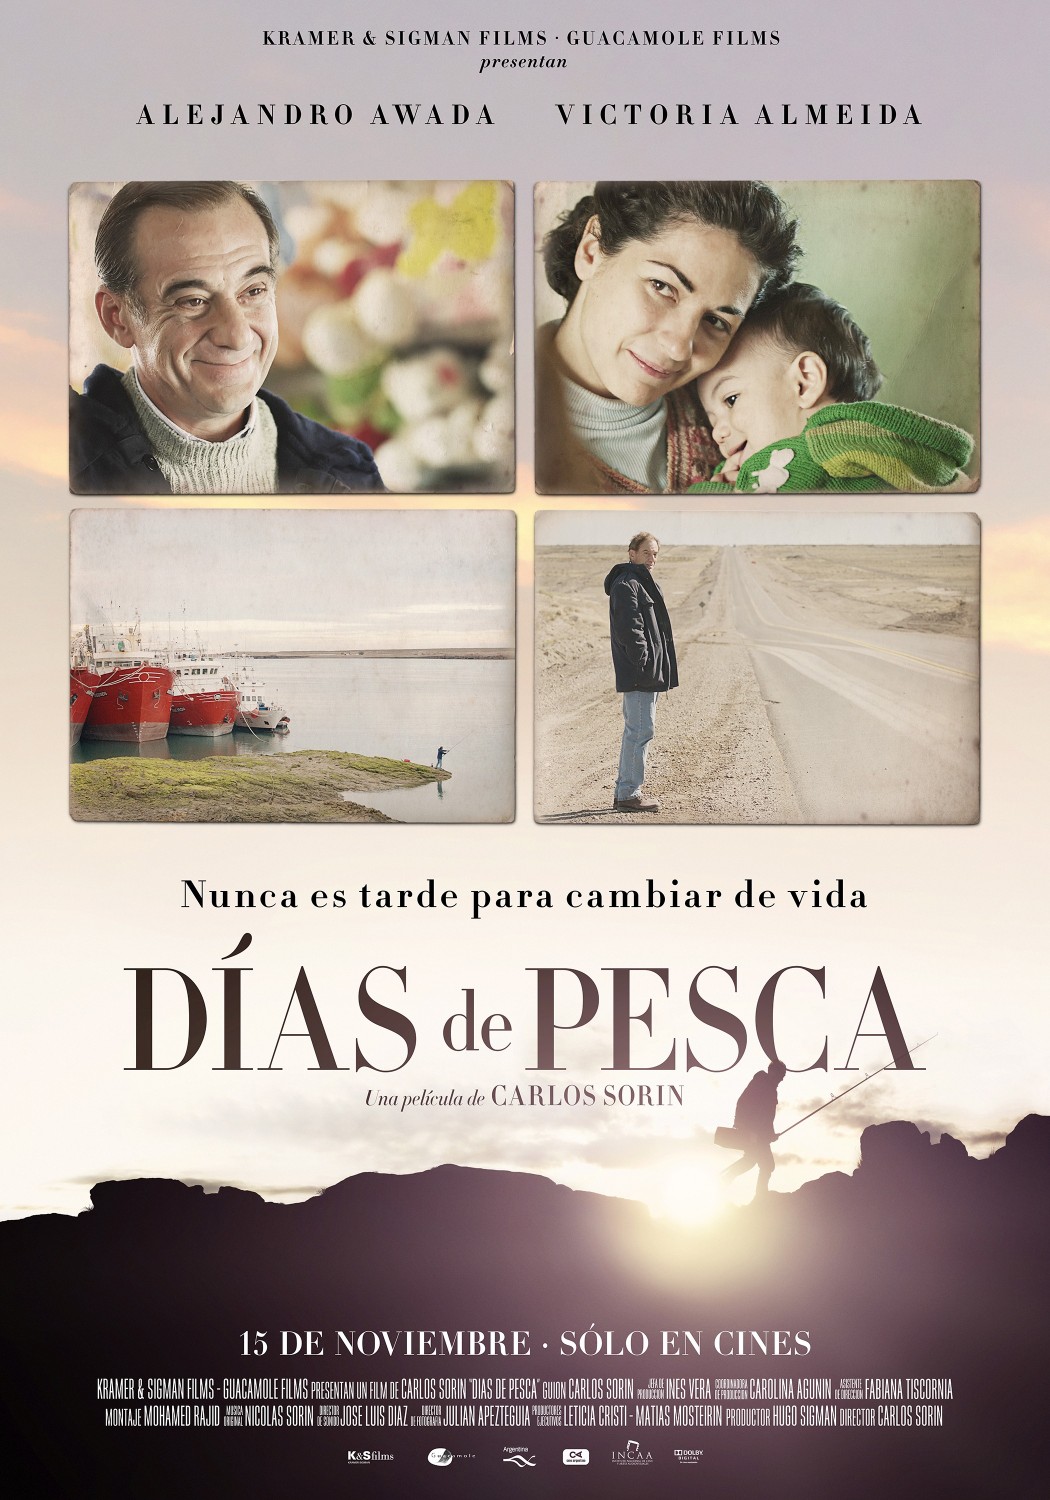 Extra Large Movie Poster Image for Días de pesca (#2 of 2)